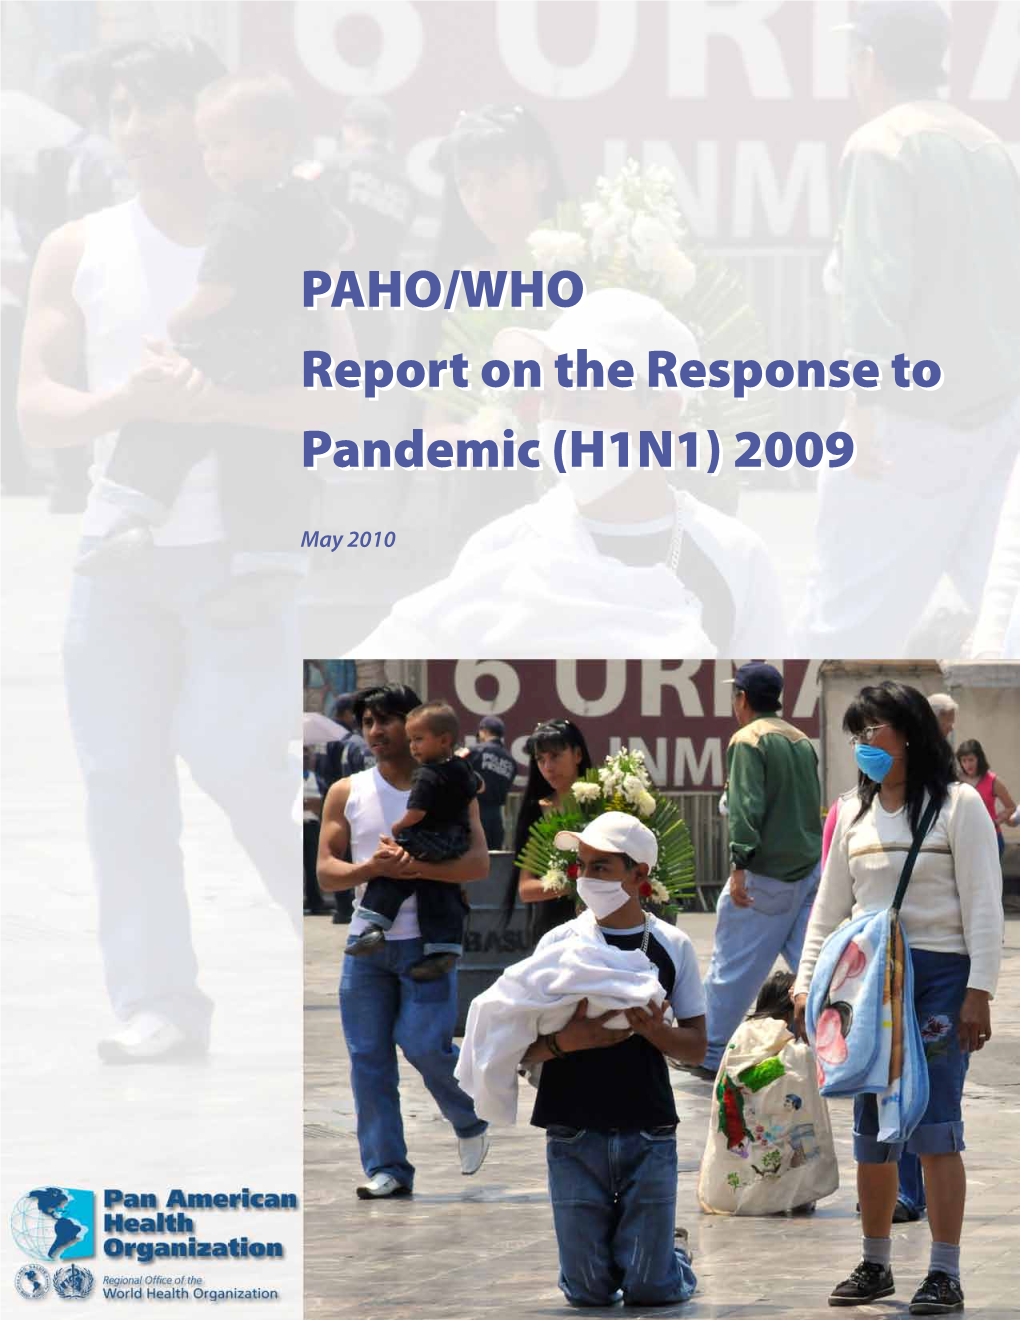 PAHO/WHO Report on the Response to Pandemic (H1N1) 2009 PAHO